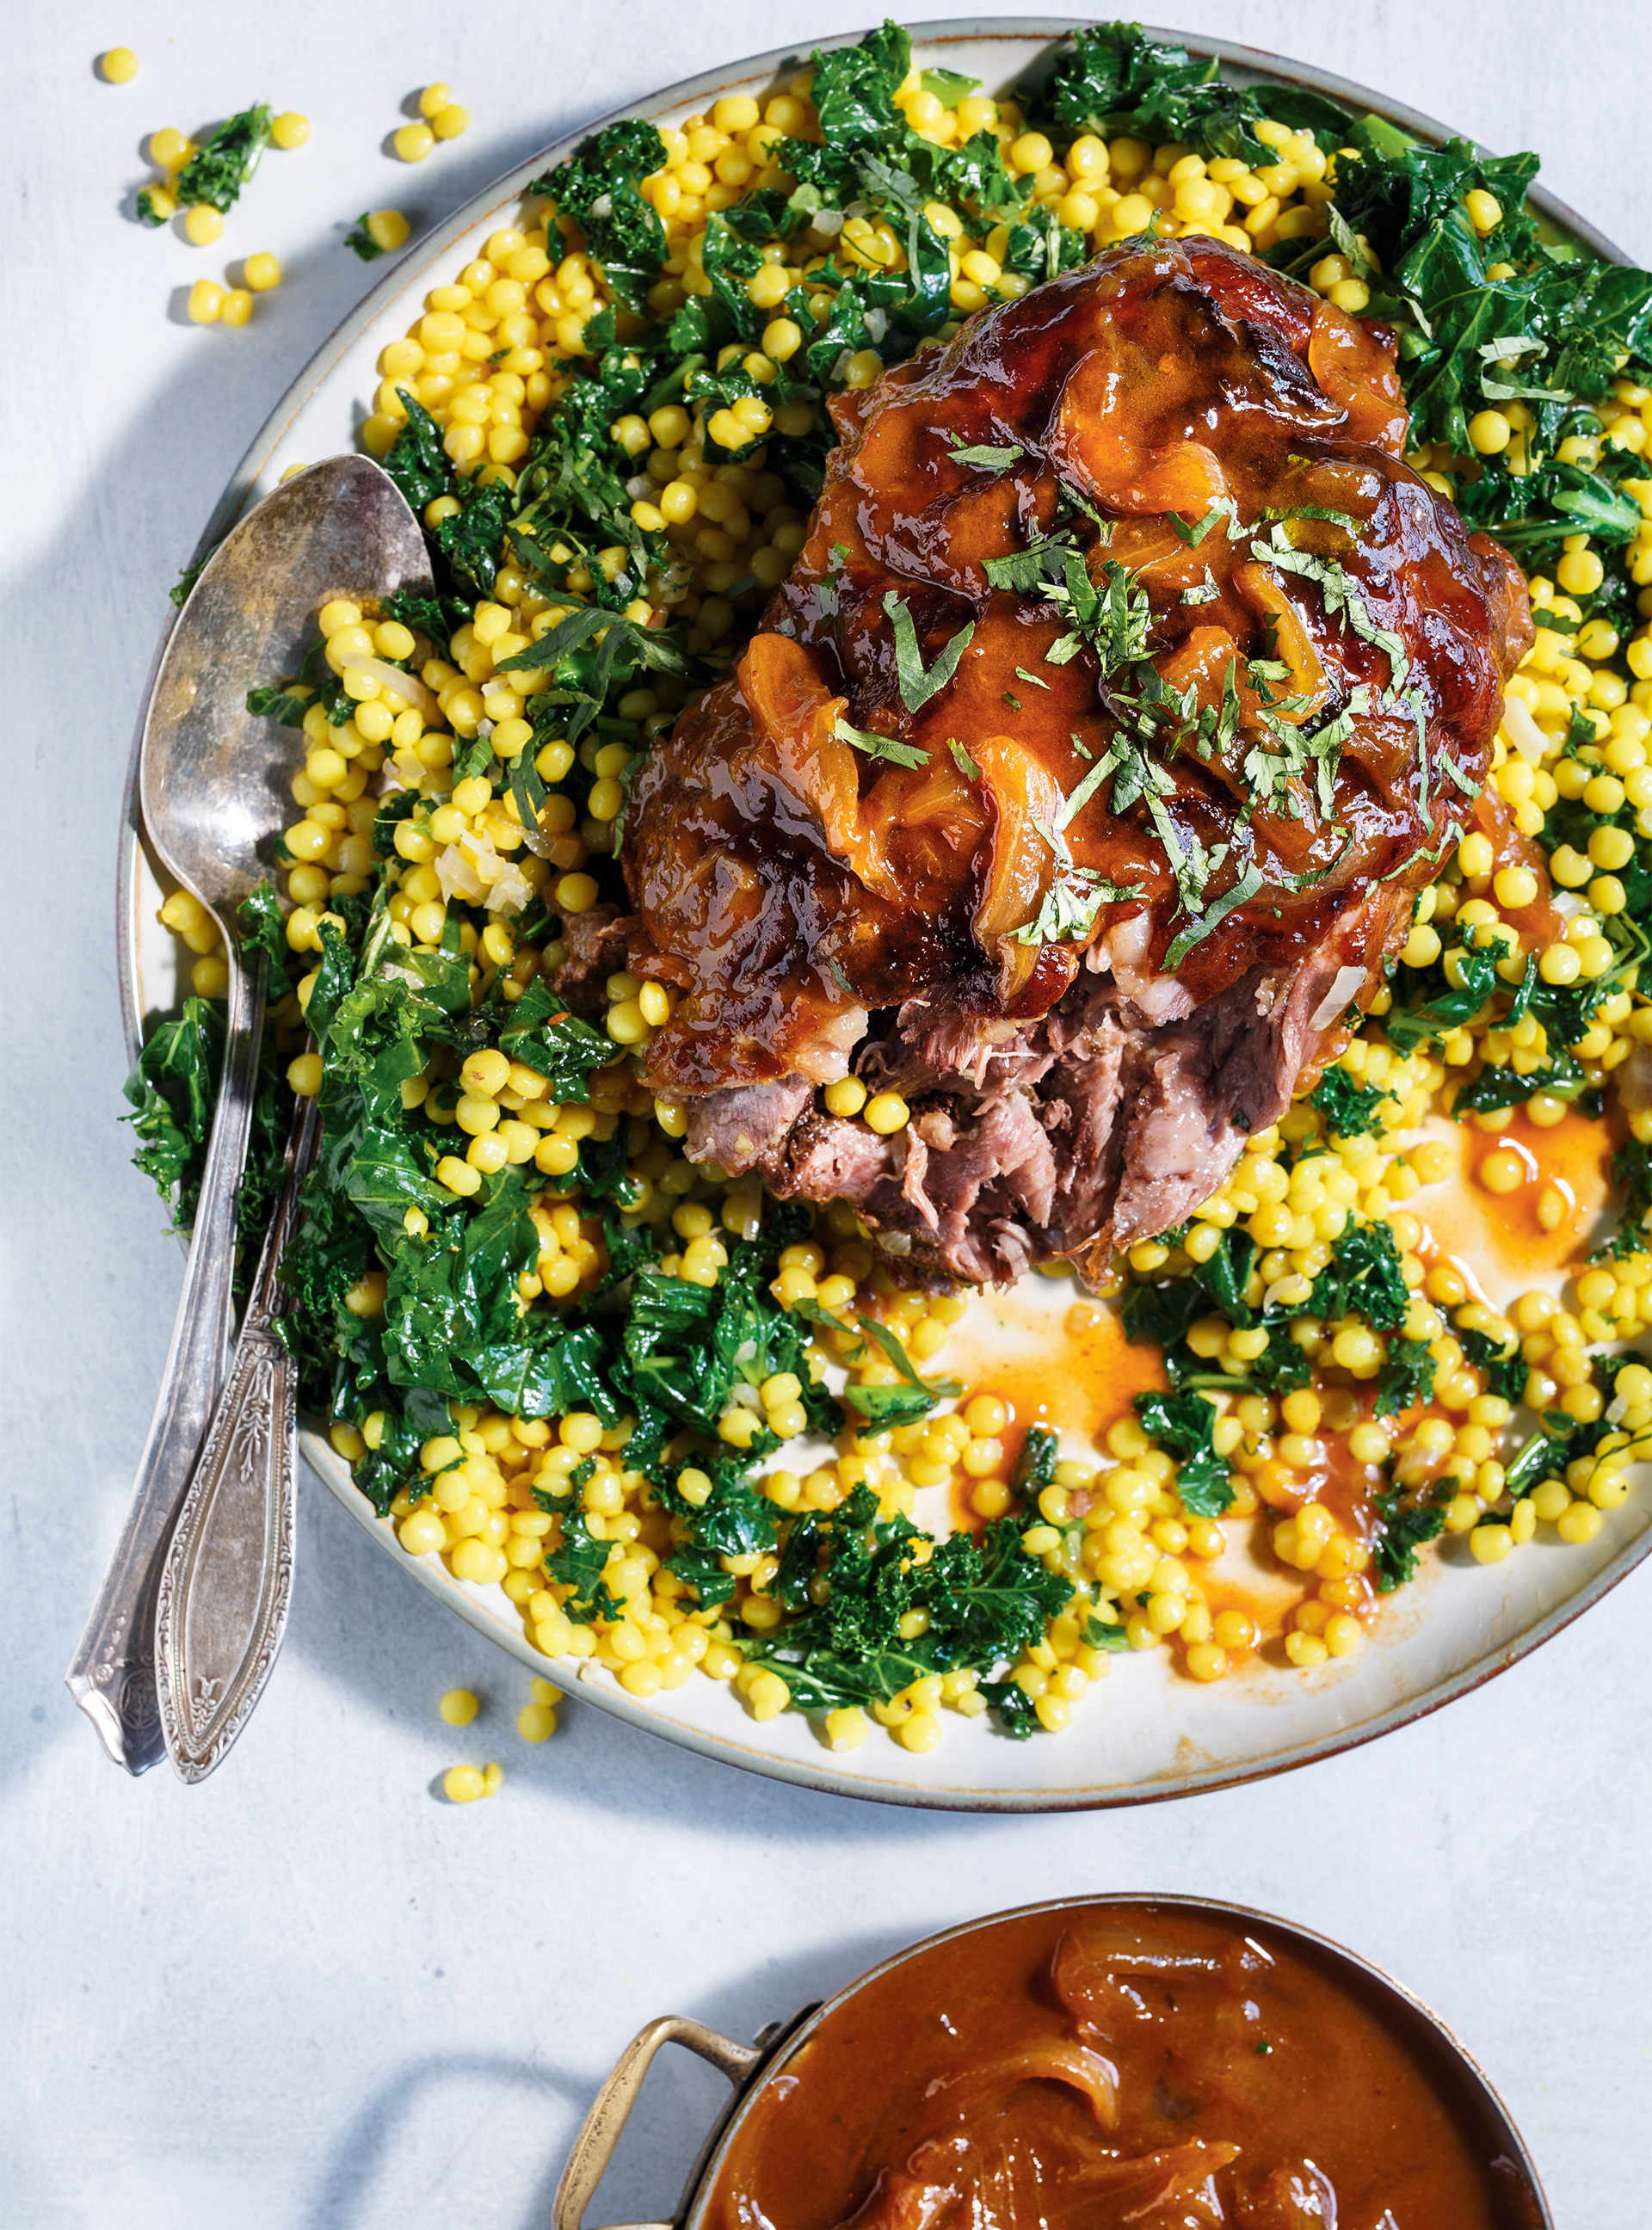 Apricot-Braised Lamb with Israeli Couscous